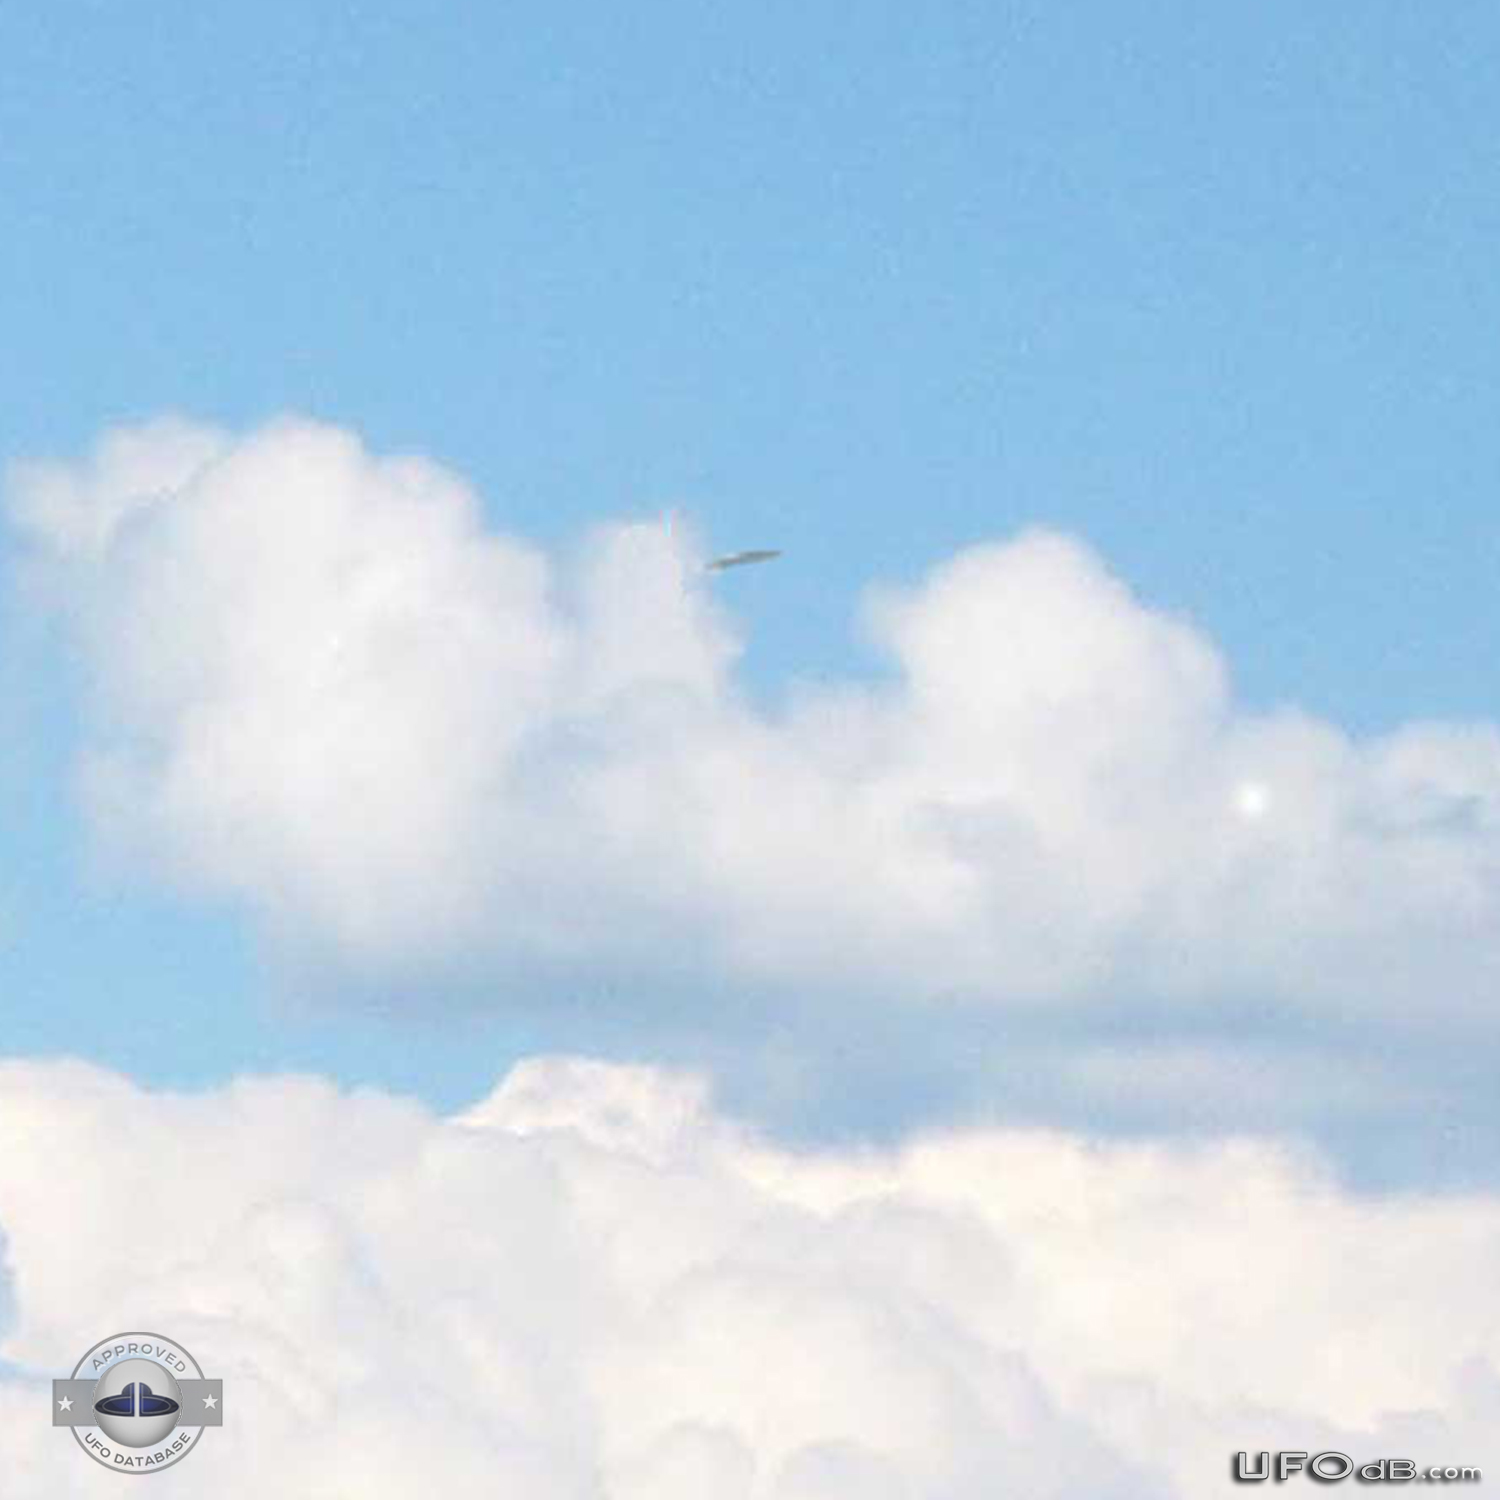 UFO in the distance over Dunoon, Scotland caught on picture in 2010 UFO Picture #398-2